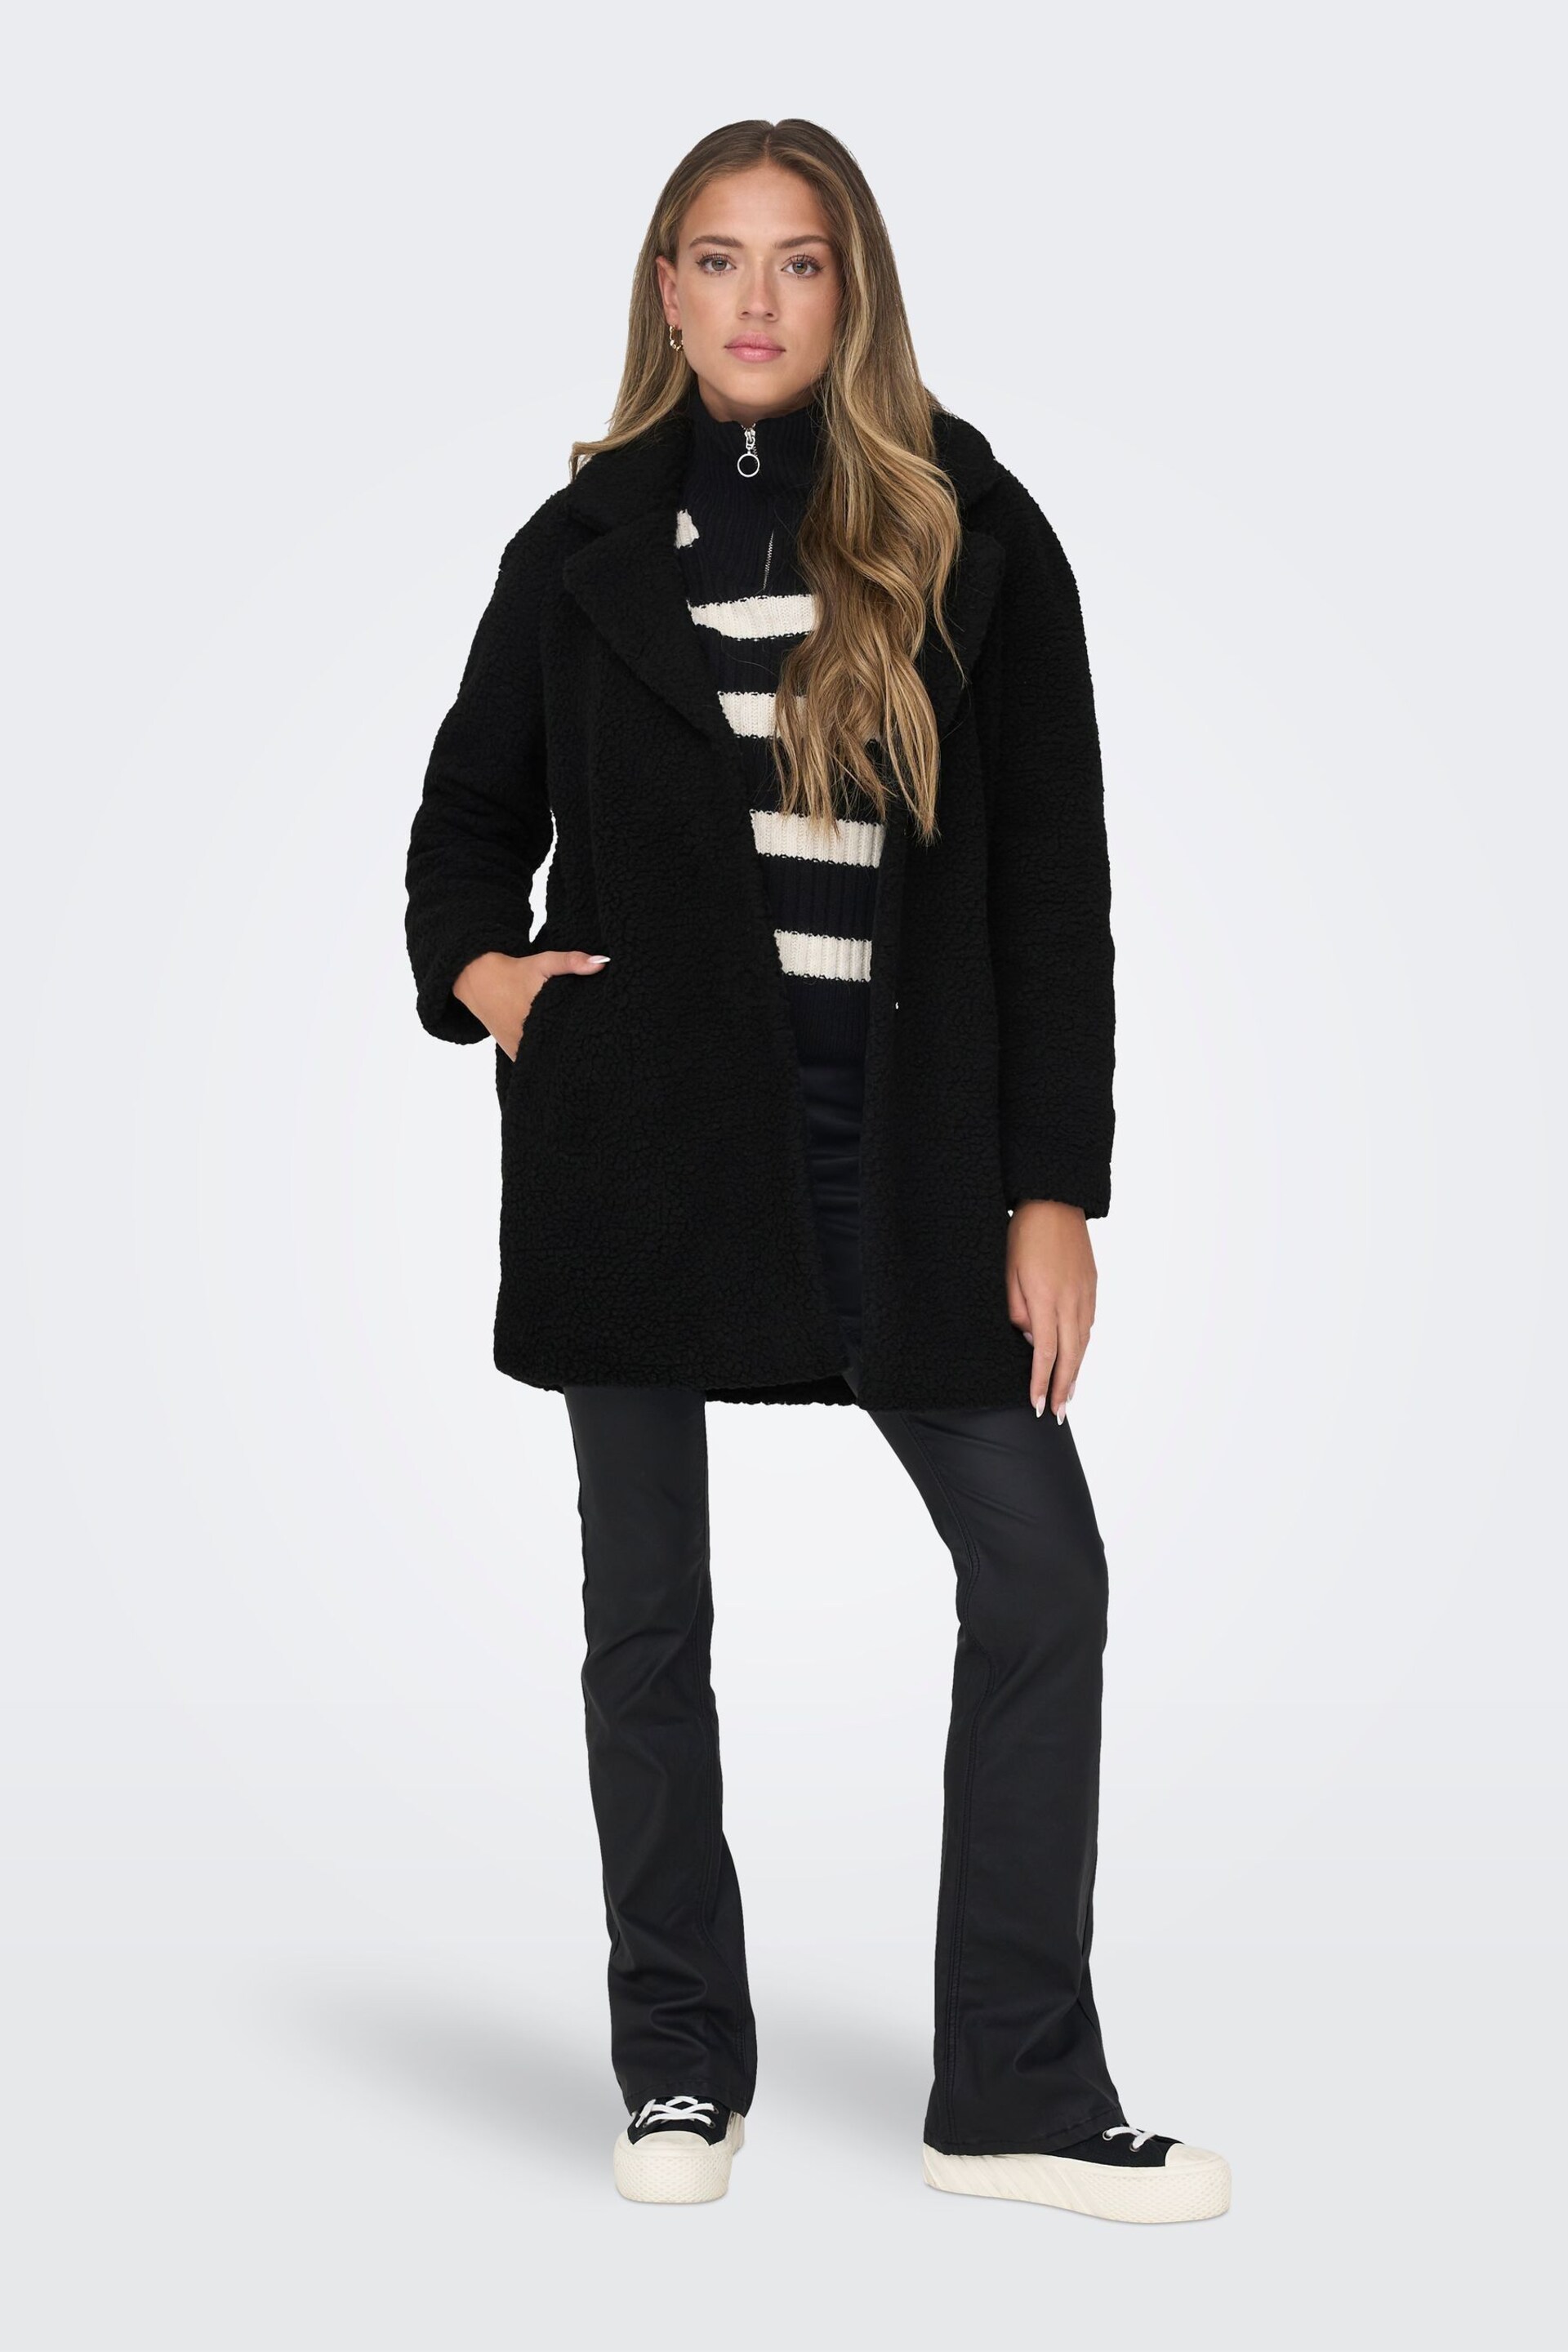 ONLY Black Tailored Cosy Teddy Borg Coat - Image 2 of 5